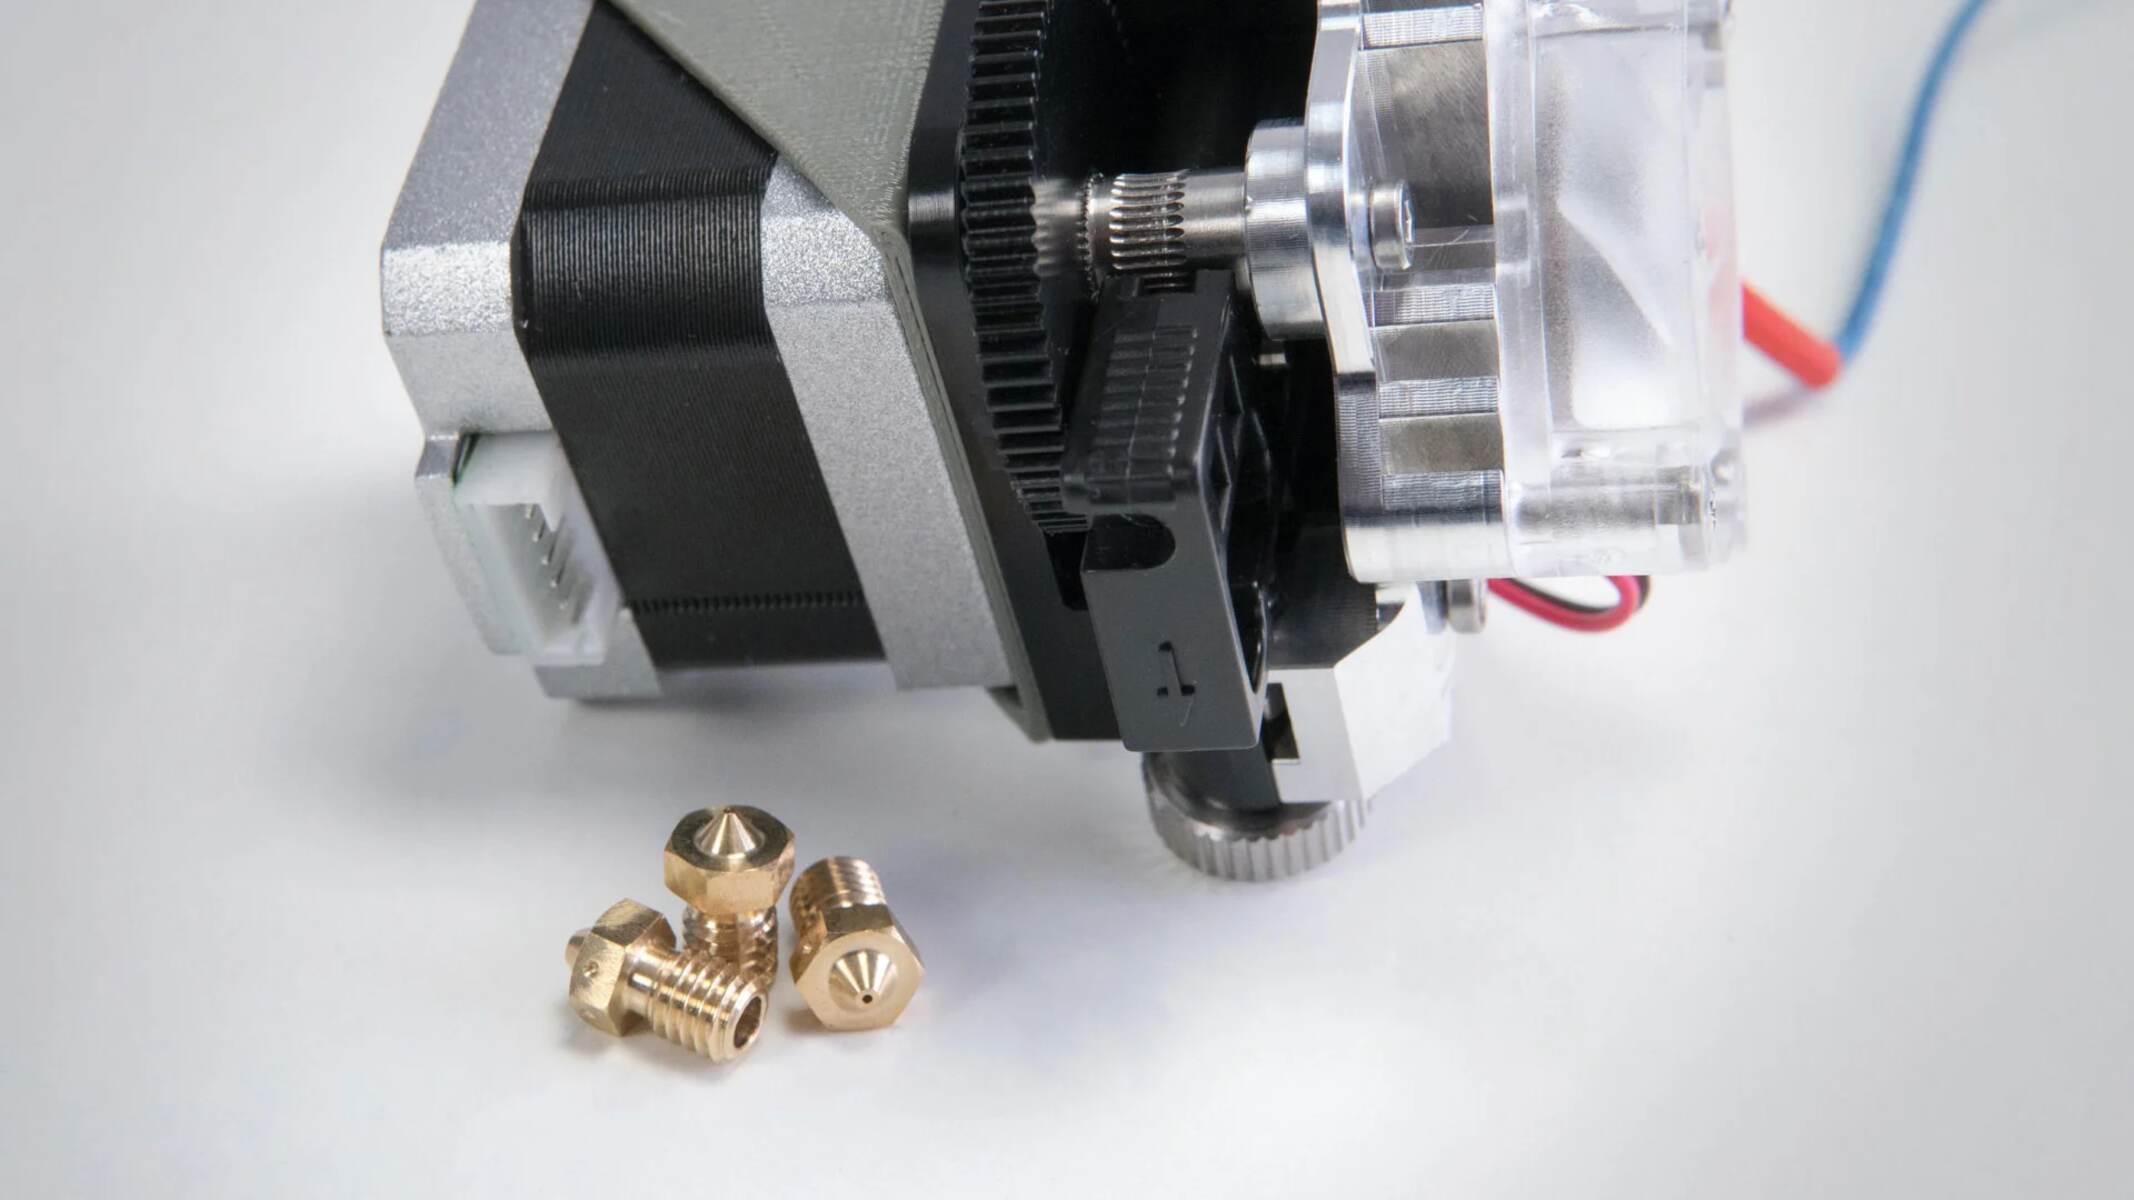 what-is-the-function-of-the-extruder-in-a-3d-printer